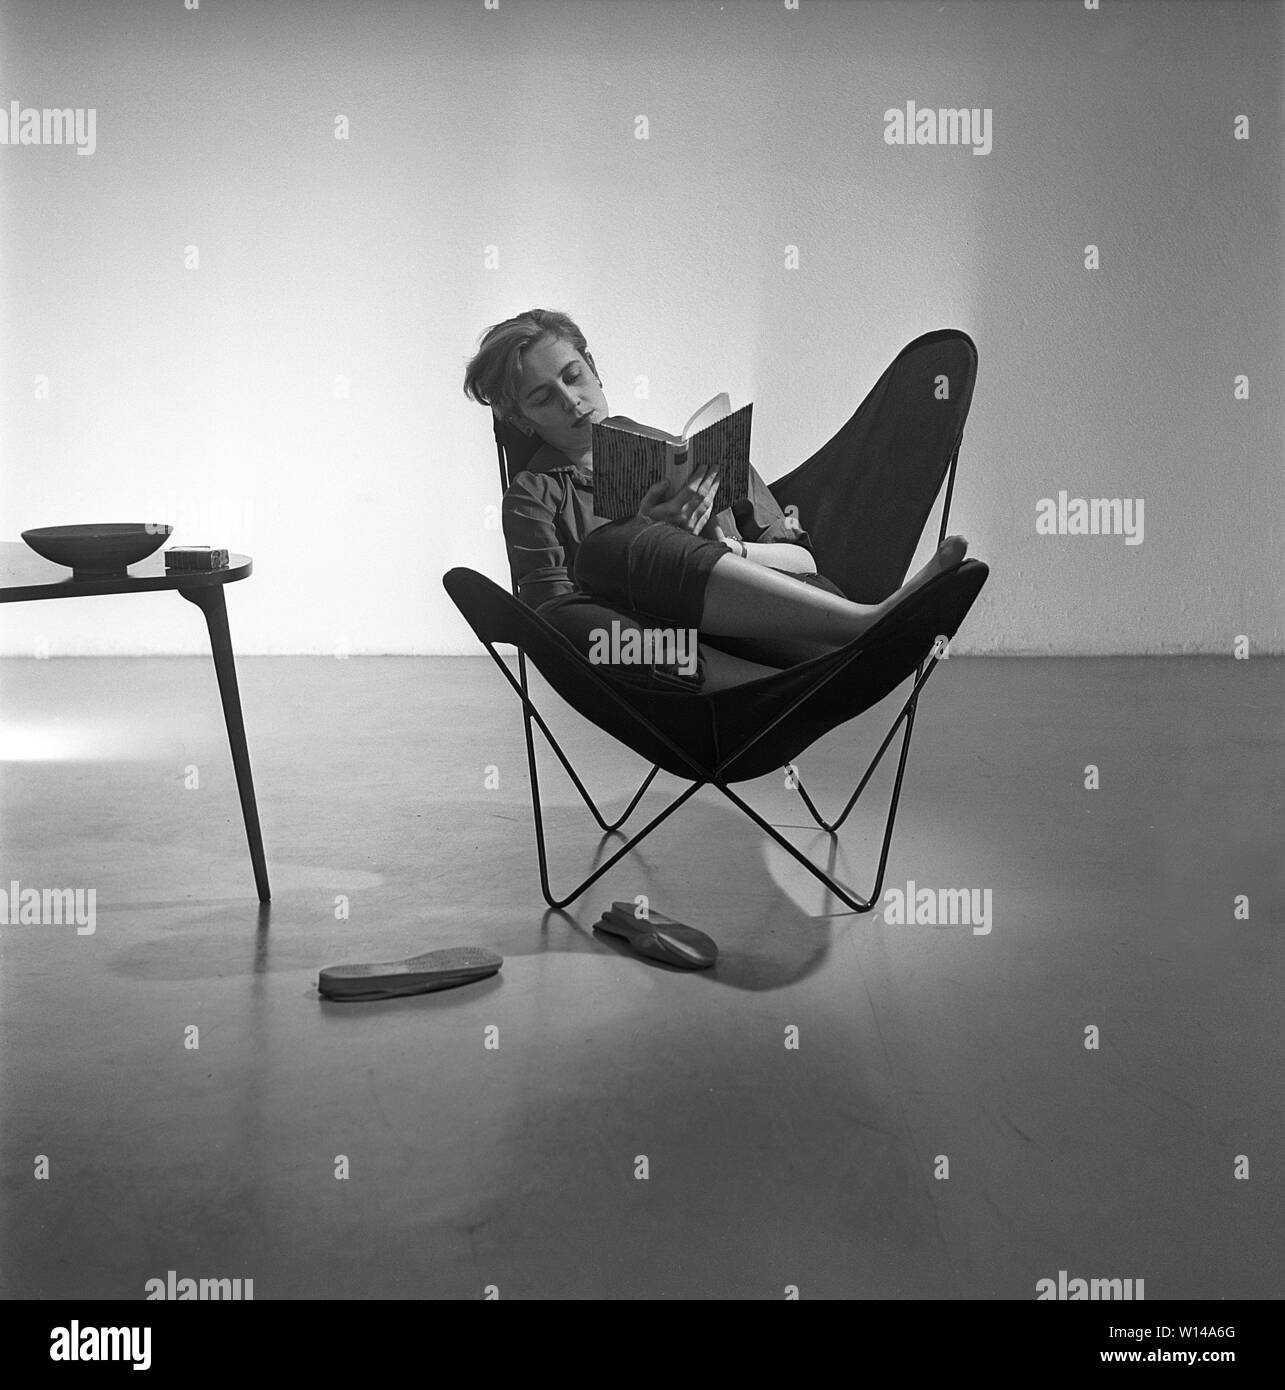 Home decor of the 1950s. A young woman is sitting in the  popular Butterfly chair, also known as a BKF chair or Hardoy chair. The chair has its nickname due to the design. For many people the chair is a symbol of the youth rebellion against a generation of parents that wanted their children to sit up straight. The chair was created by two argentinian architects Juan Kurchan and Jorge Ferrari Hardoy, and spanish Antonio Bonet in the 1930s. It was named BKD but was considered hard to sell, probably because of its futuristic design. American Hans Knoll re introduced it 1947 and it became an inter Stock Photo